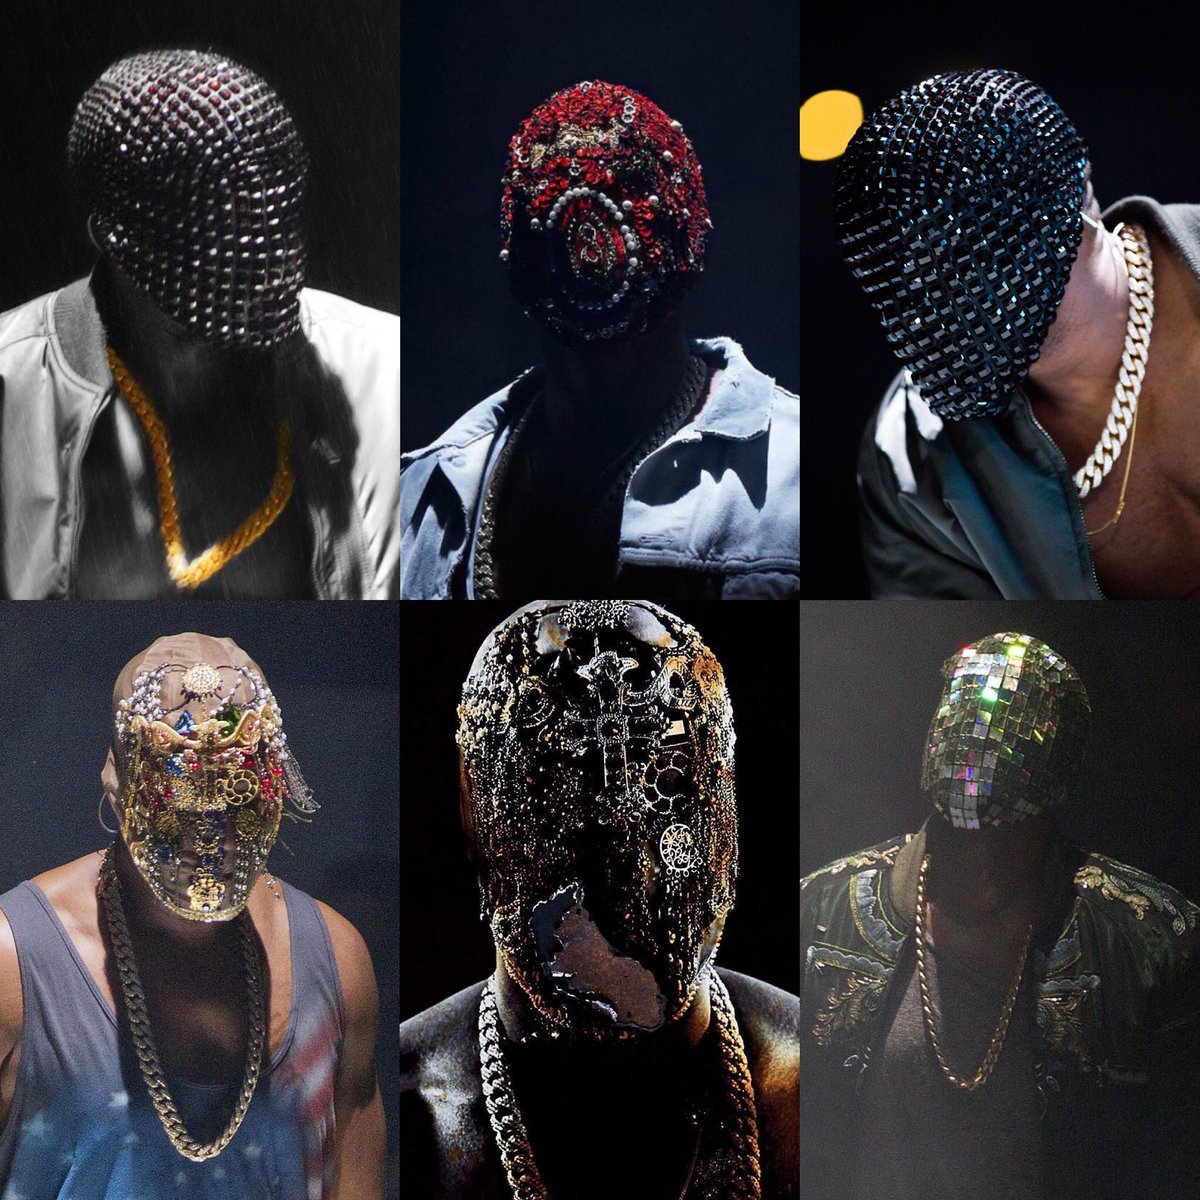 Since it’s Yeezus day, I just wanted to remind y’all how fucking cool Kanye’s tour masks were...